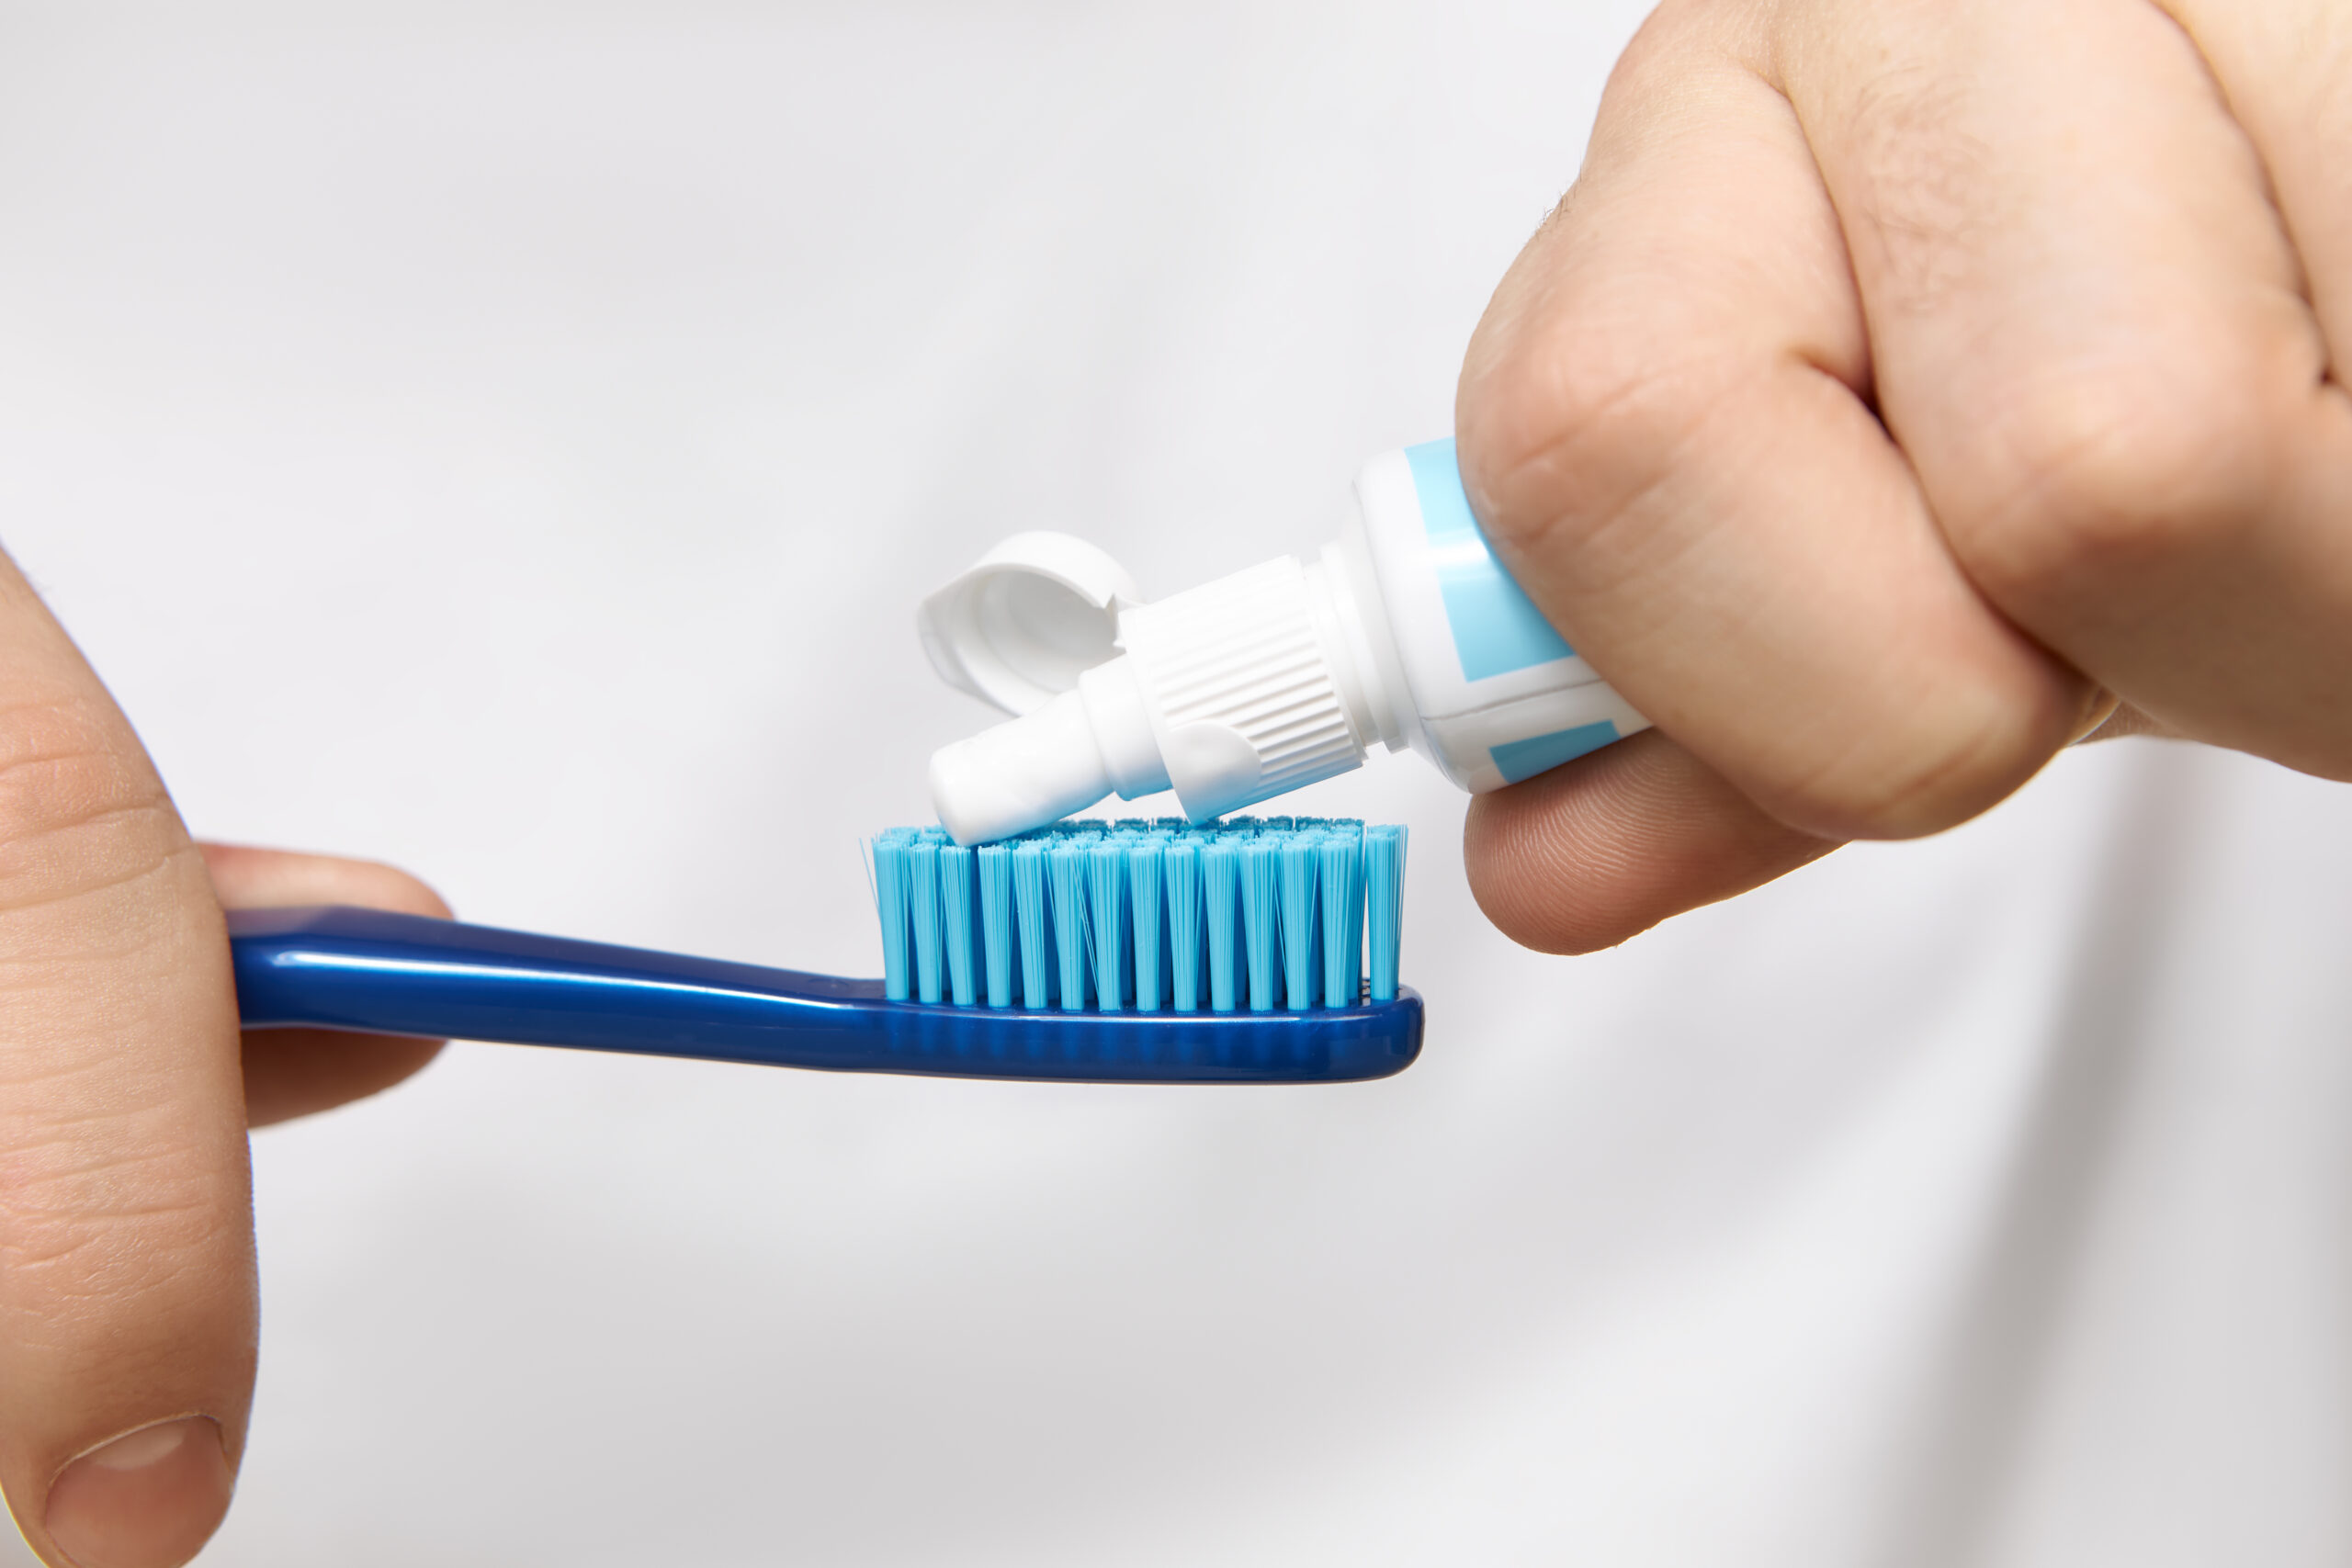 Close up image of man's hands holding tube, squeezing whitening toothpaste on brush. Cropped shot of young male going to clean oral cavity after having meal. Hygiene, care and healthy lifestyle